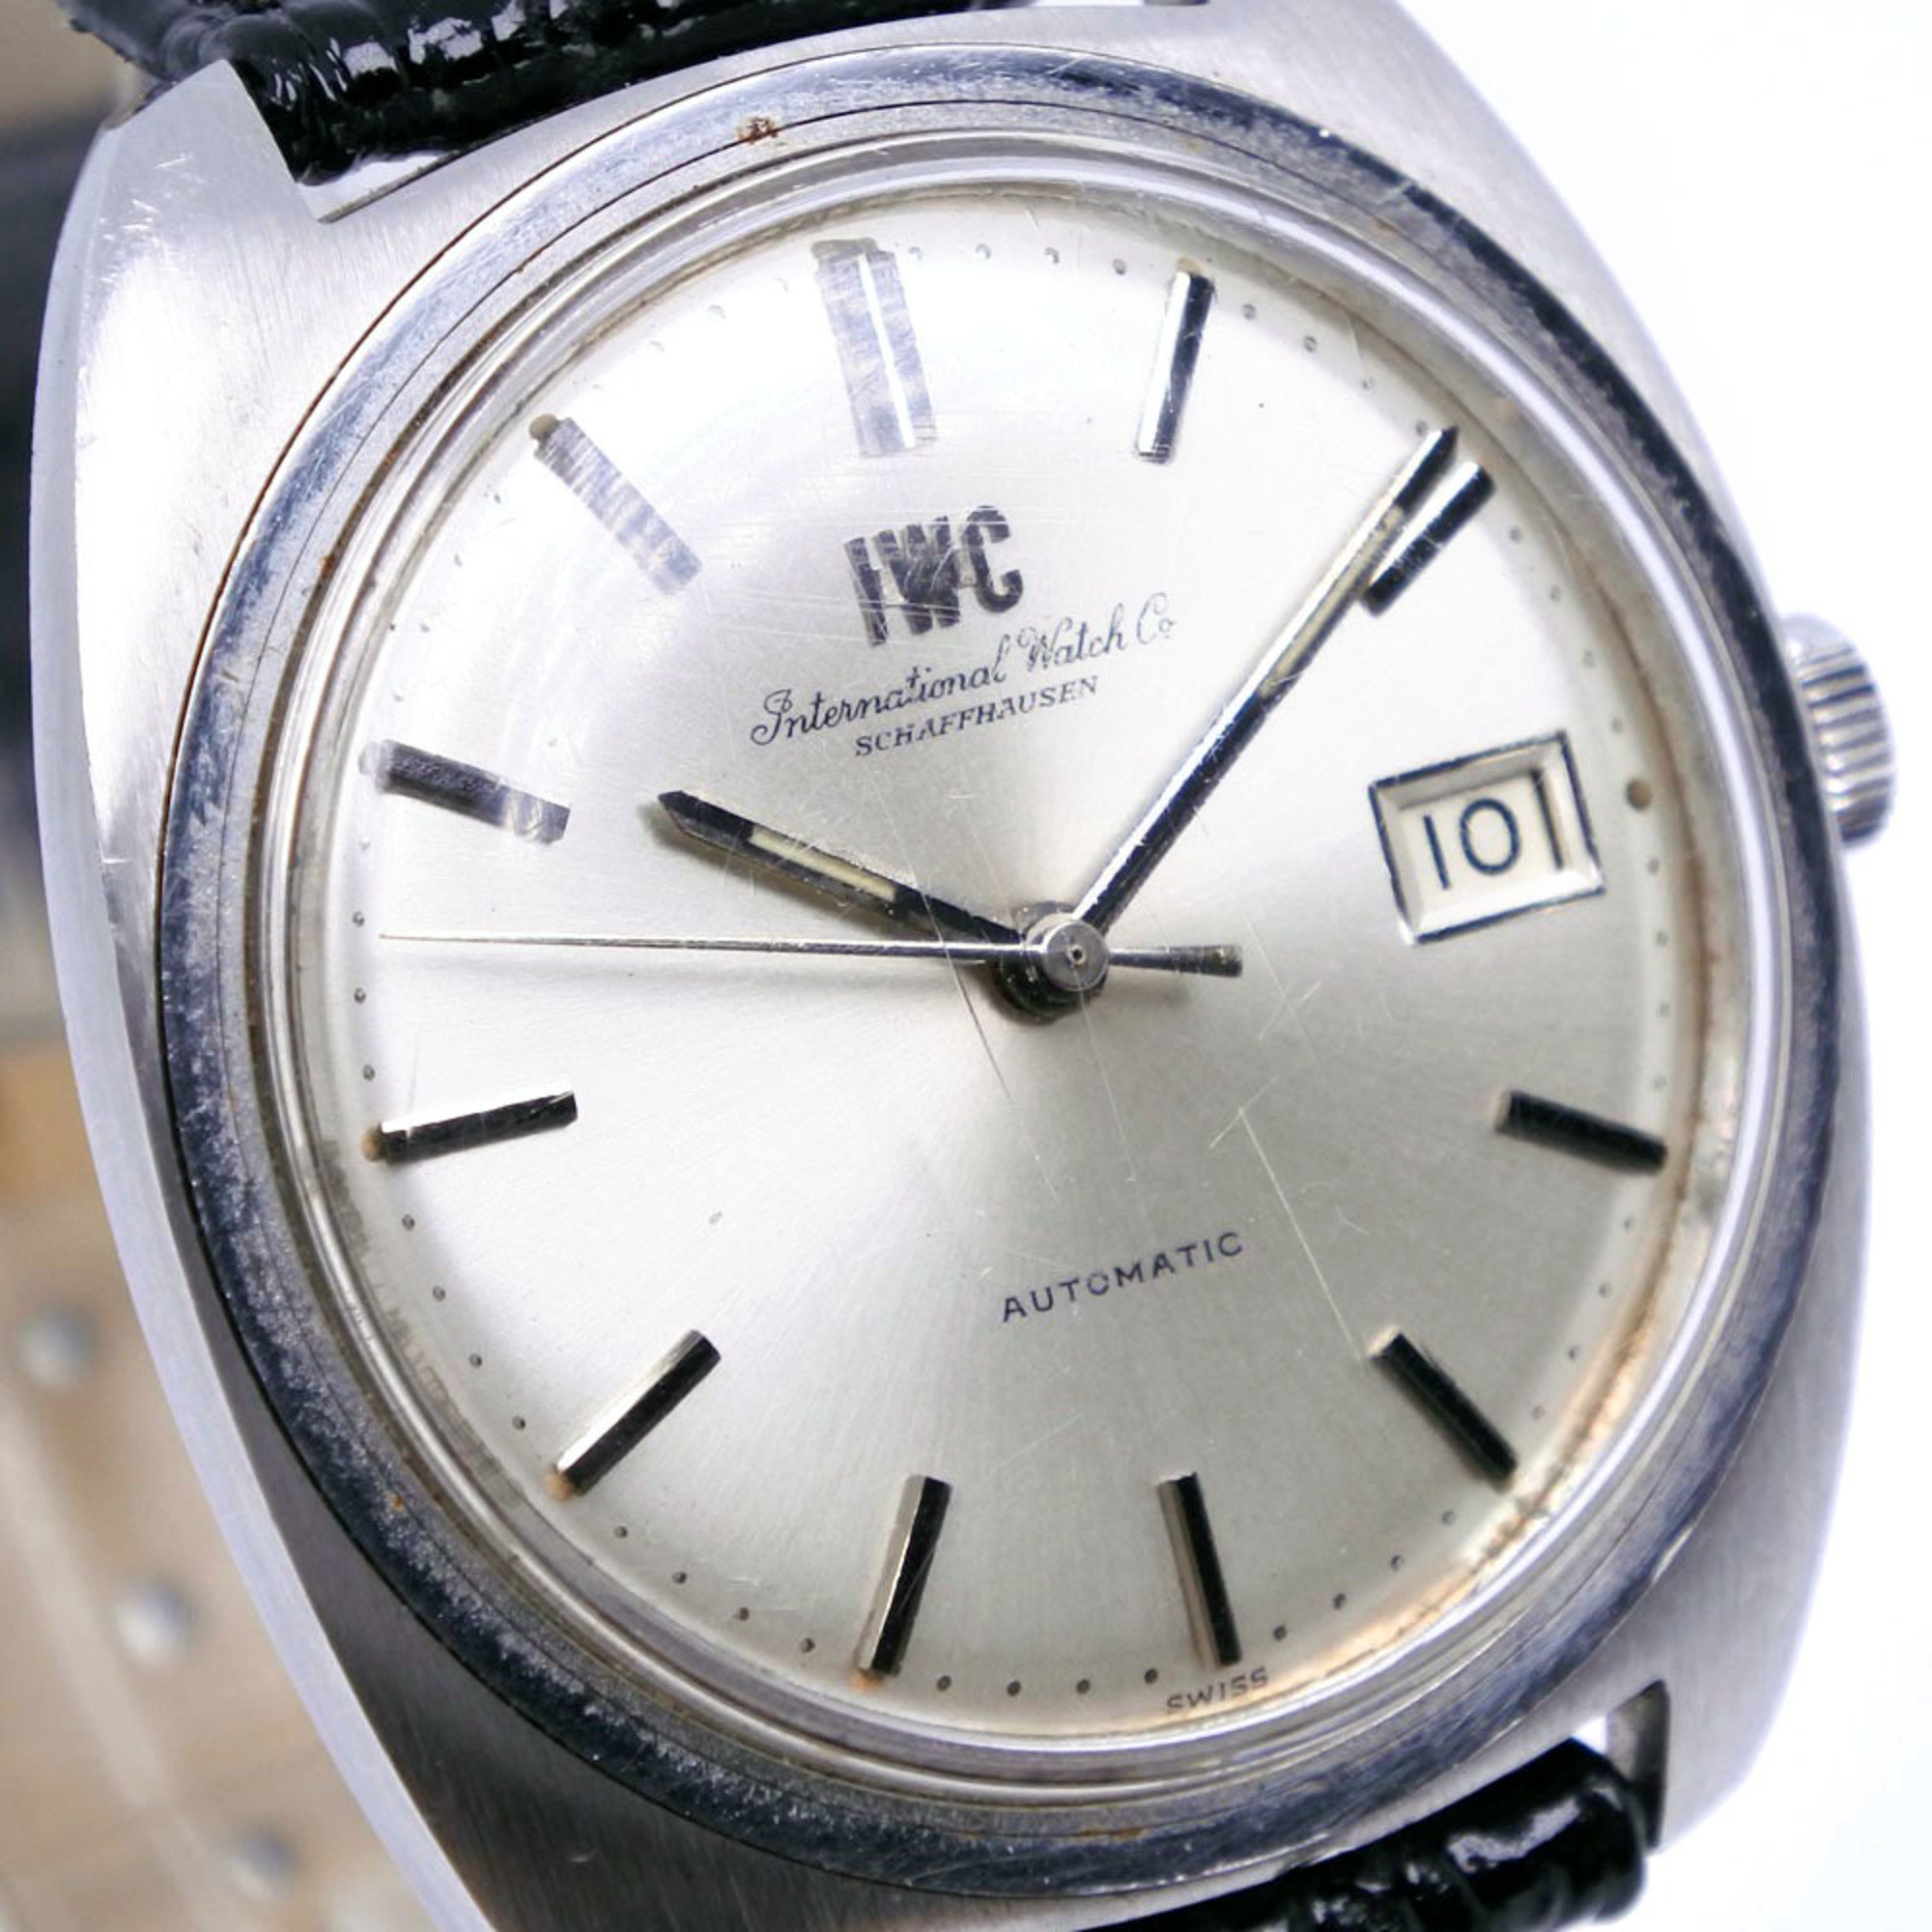 IWC Old Inter cal.8541B R819AD Stainless Steel Silver Automatic Men's Dial Watch